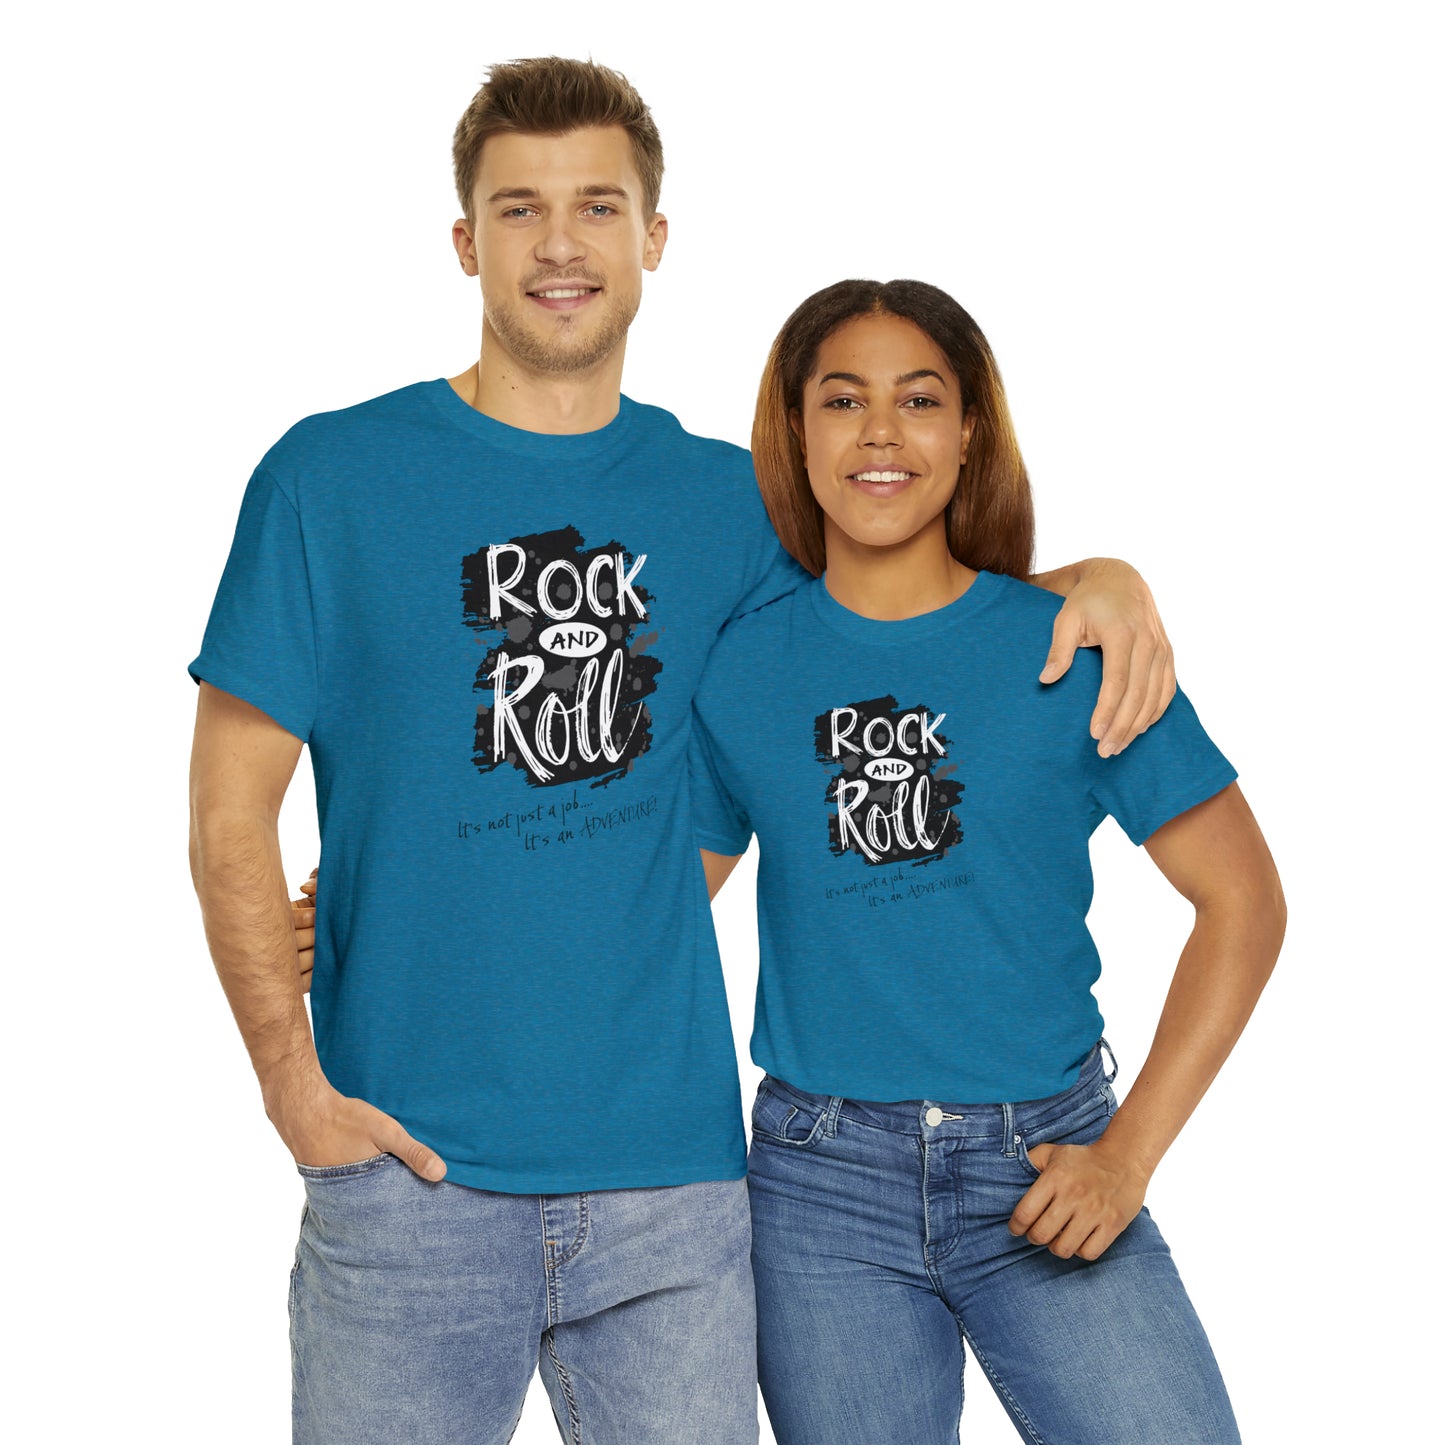 Rock and Roll T-Shirt For Adventure T Shirt For Musician TShirt For Music Shirt For Live Music Shirt For Band Tee For Musician Gift For Music Gift